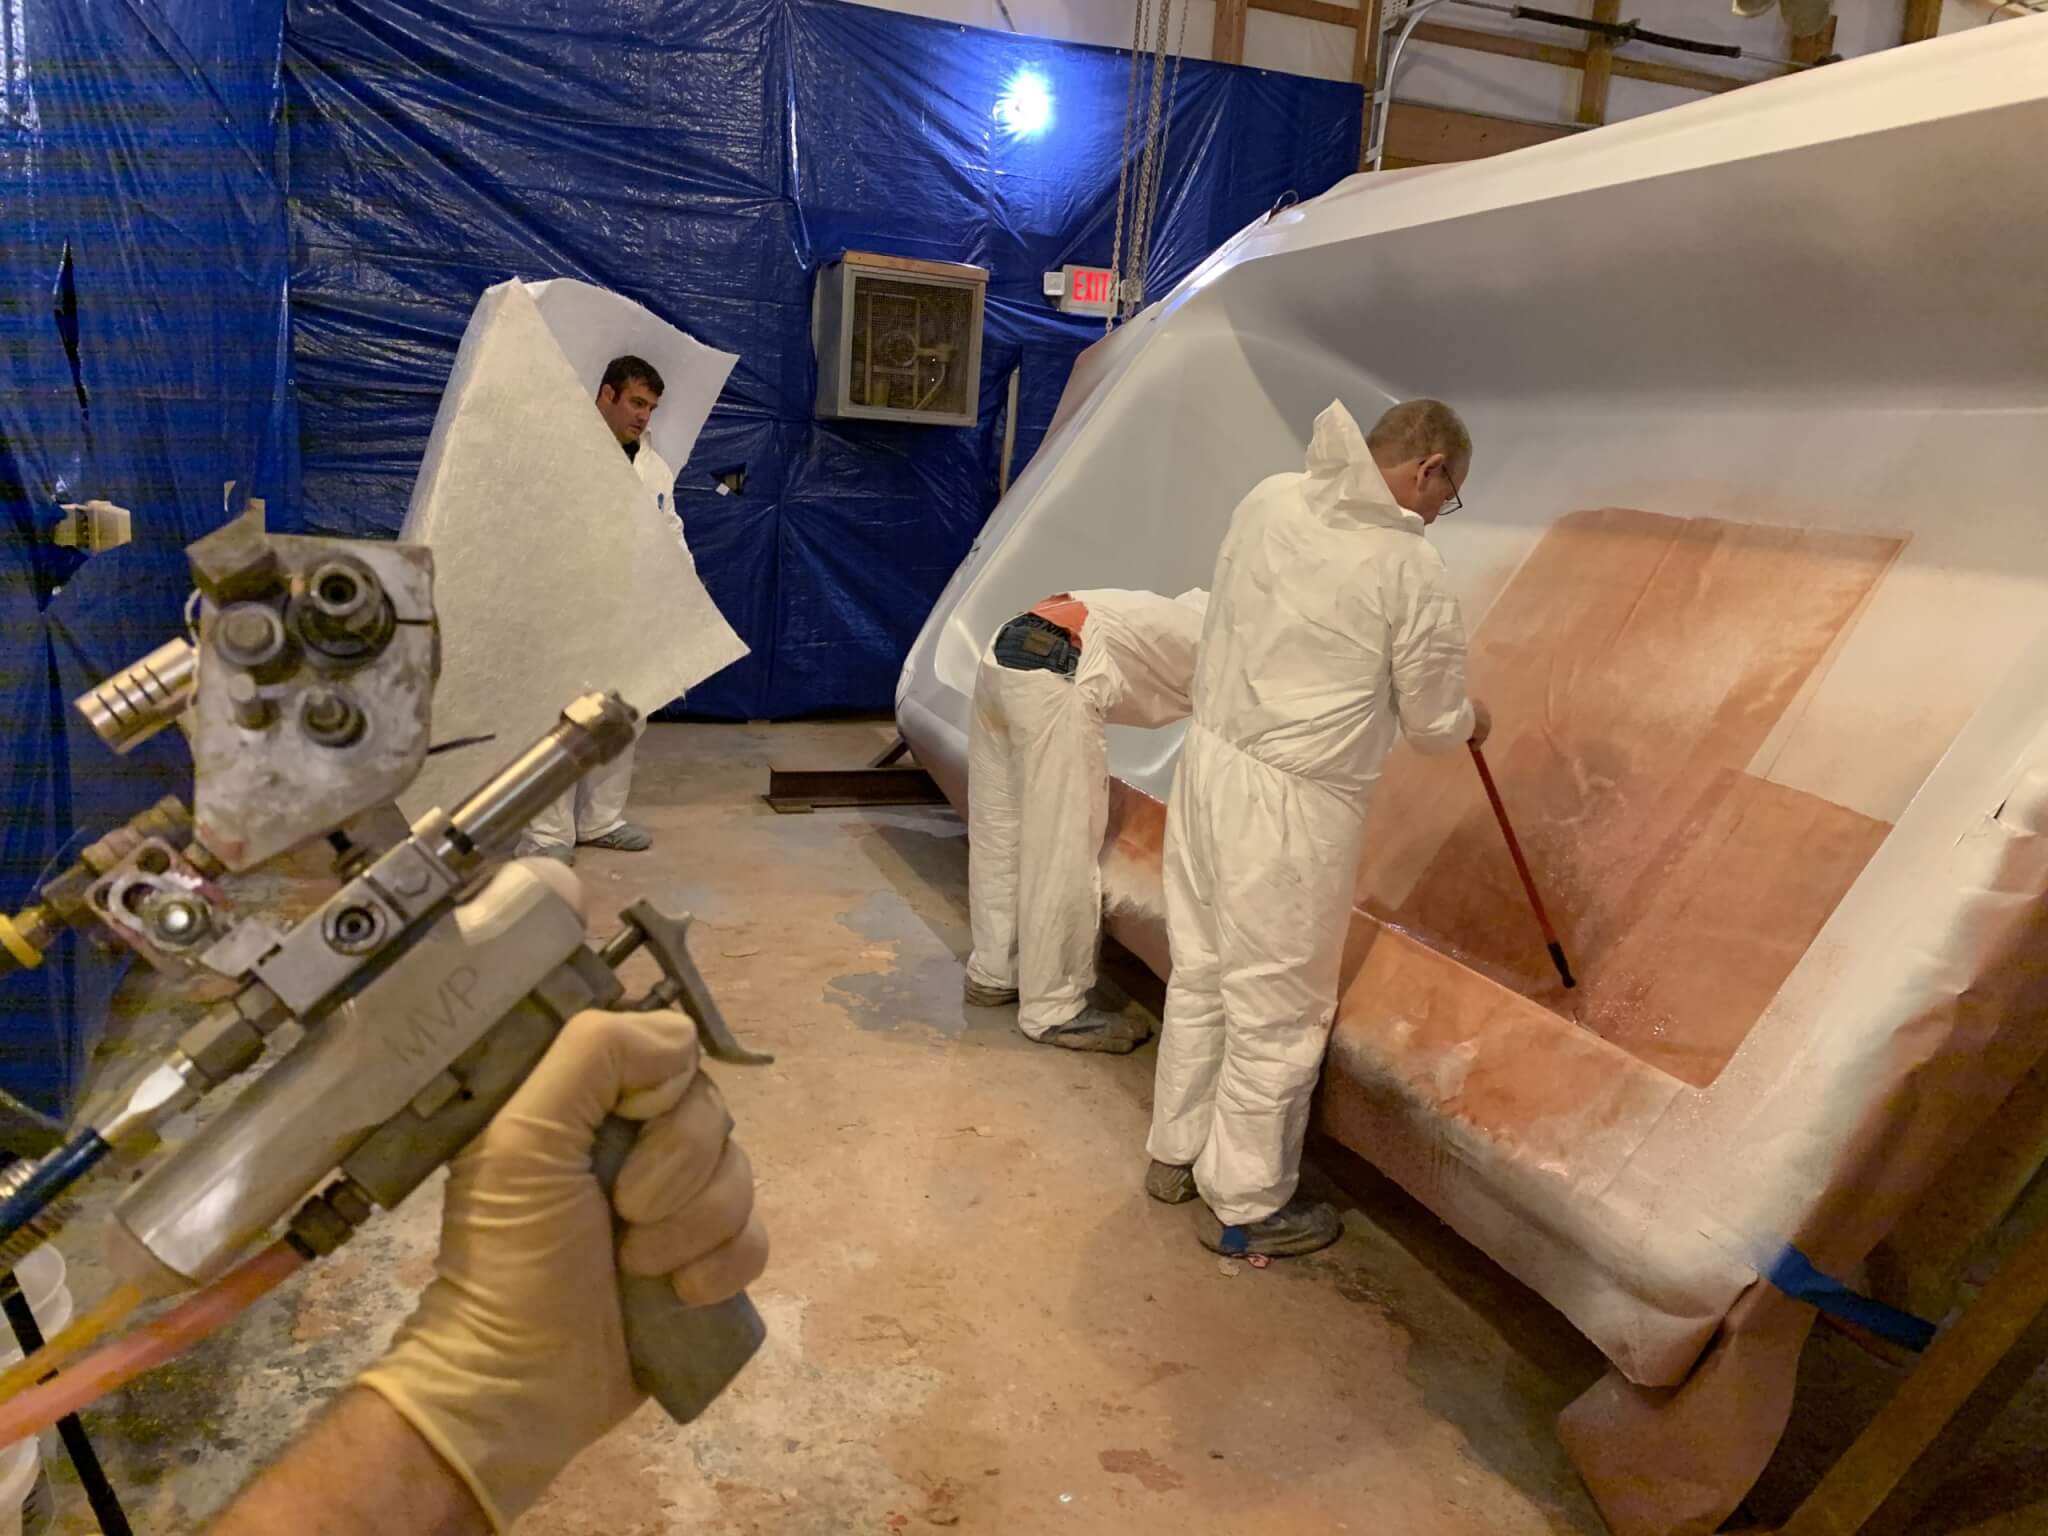 crew of people working on a fiberglass project